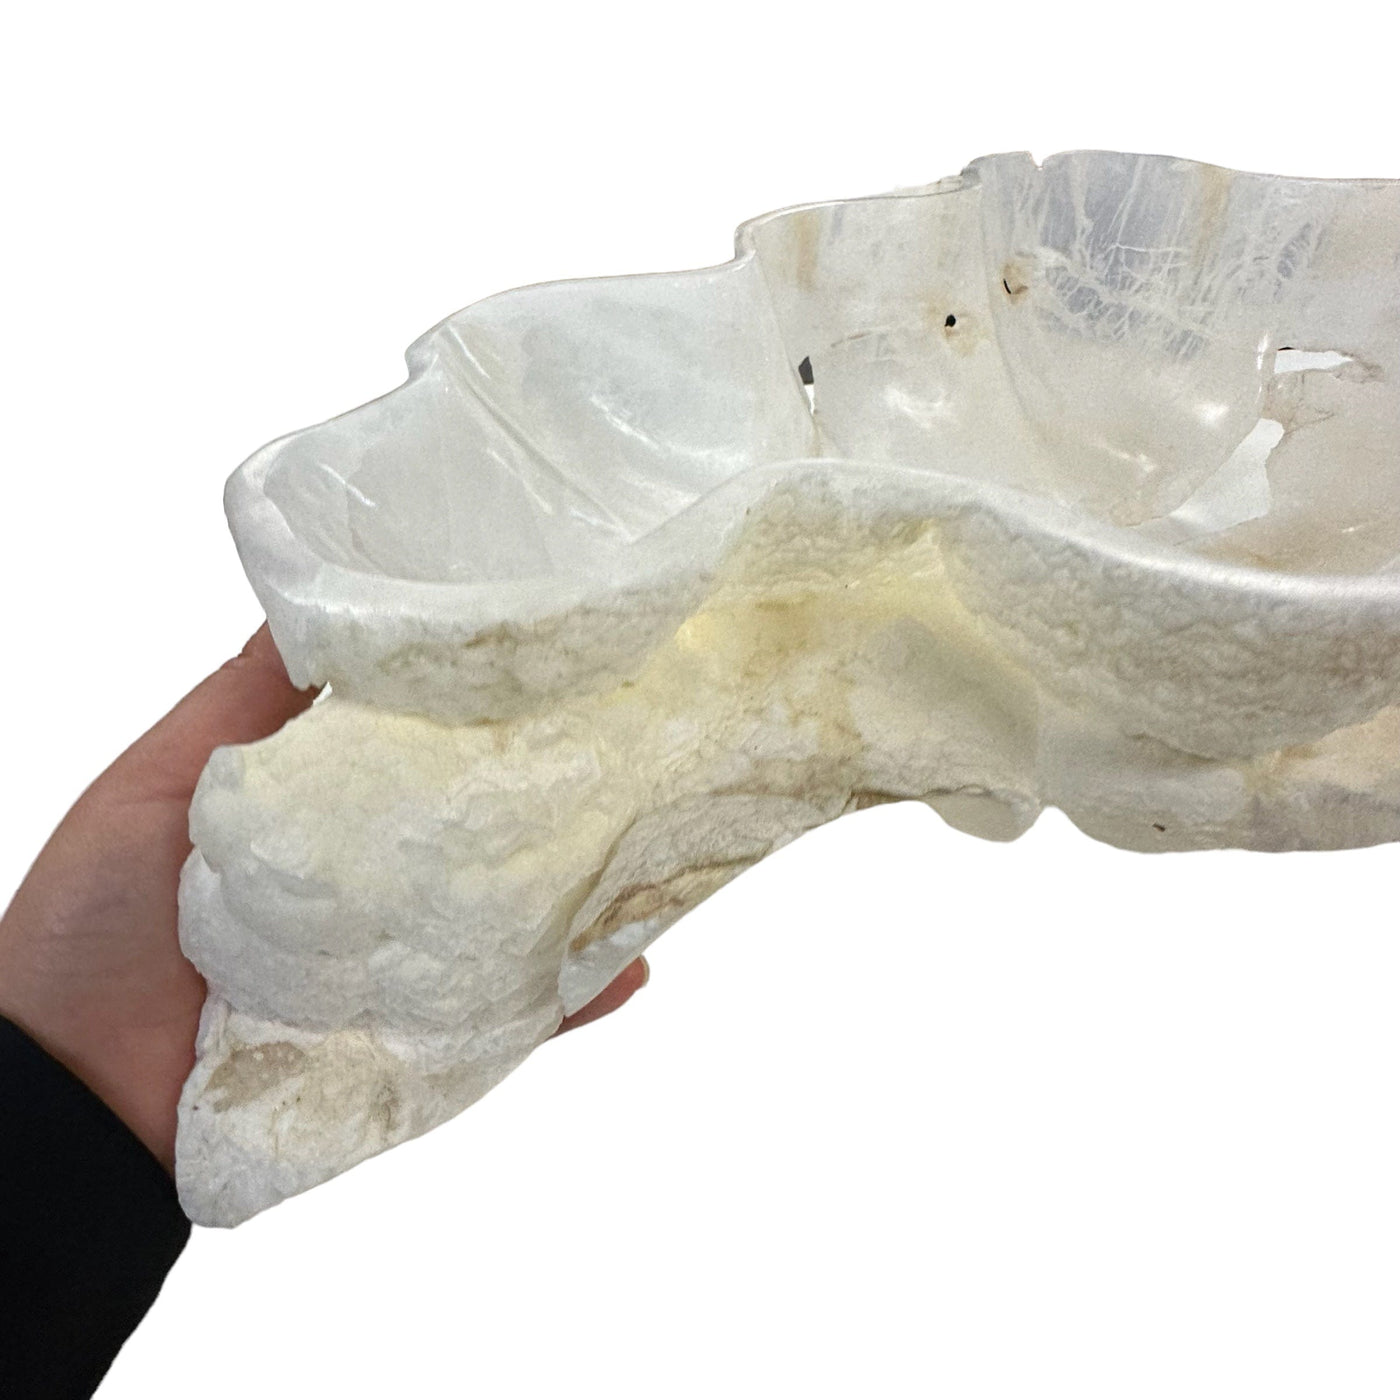 natural formation on the bowl next to hand for size reference 